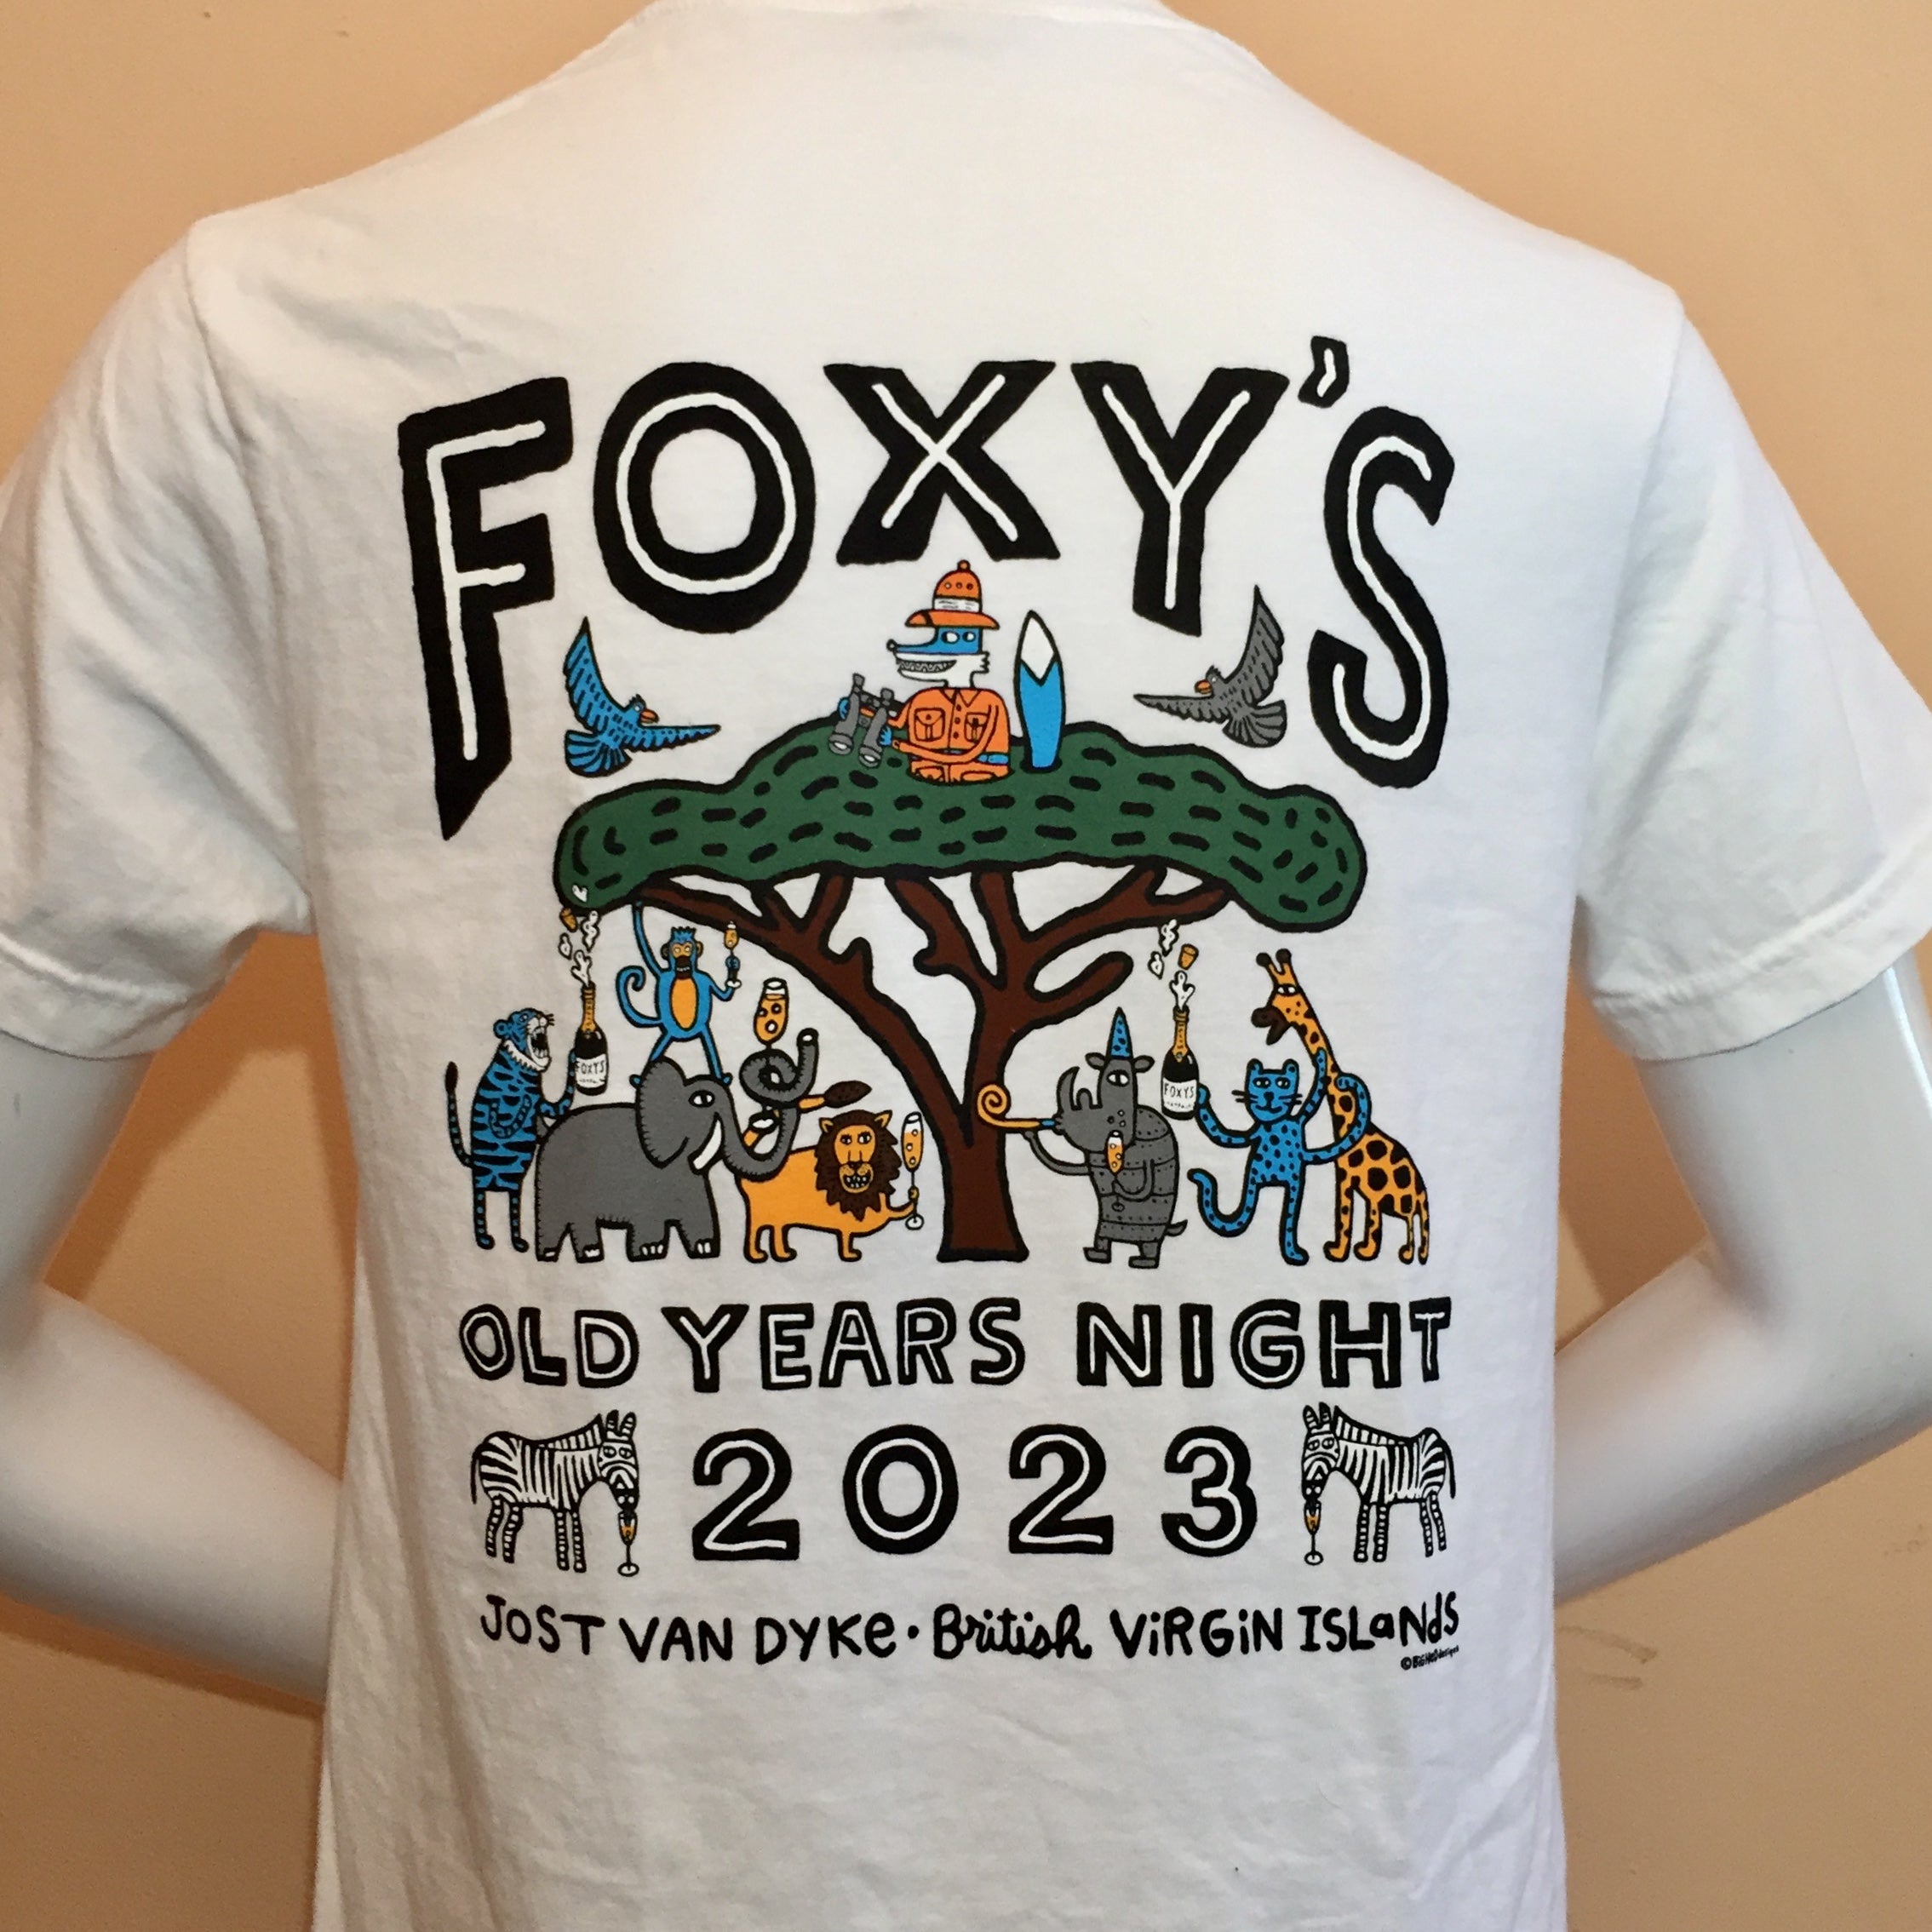 SALE Foxy's Old Year's Night Event Tee 22-23 'African Safari' Short Sleeve from Big Hed